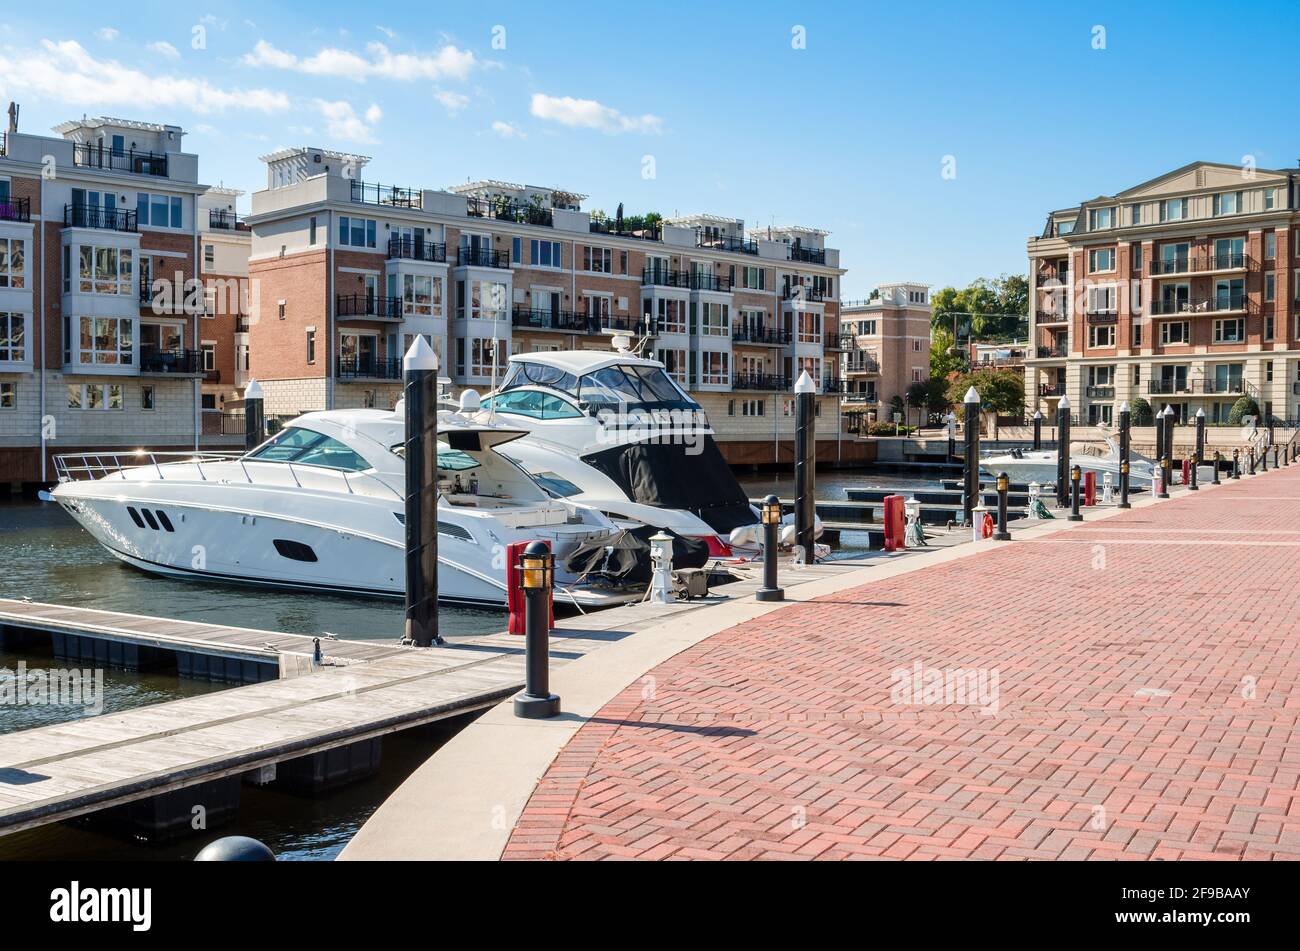 Yachts in a marina surrounded by modern apartment buildings on a sunny autumn day Stock Photo